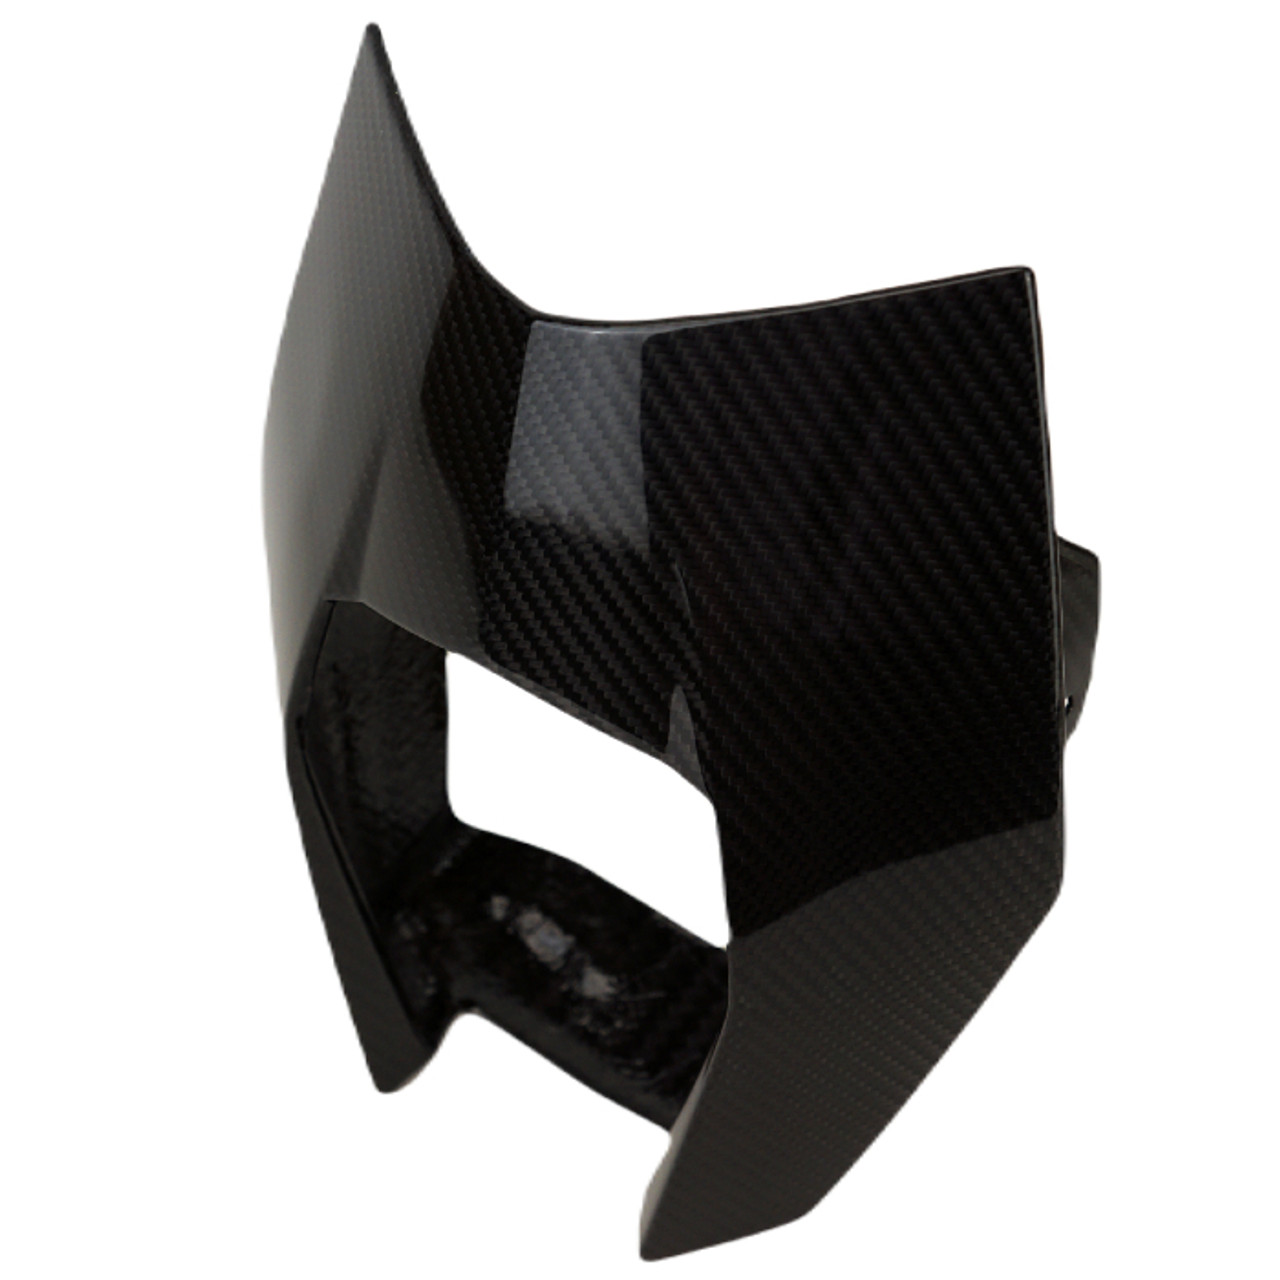 Front Fairing in Glossy Twill Weave Carbon Fiber for KTM 690 SMC,R 2008-2018 & Enduro,R 2009-2018